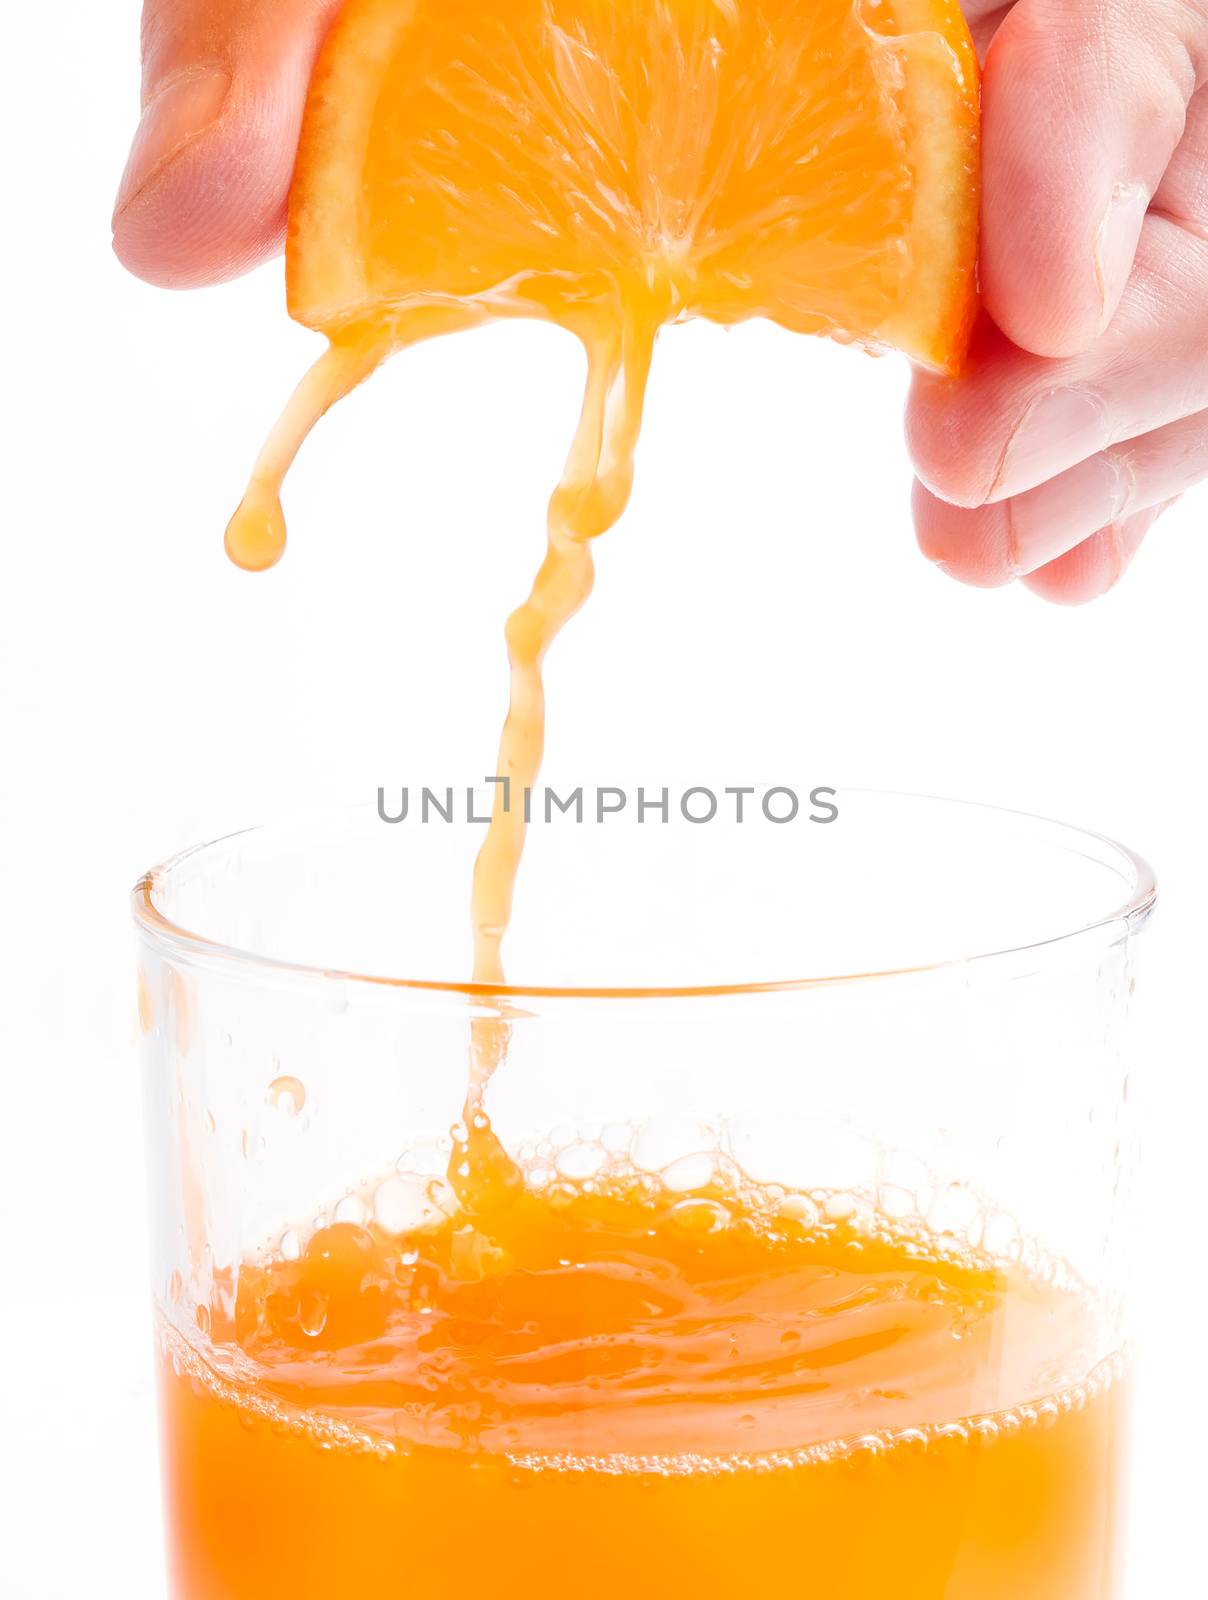 Orange Juice Glass Showing Healthy Eating And Fruity